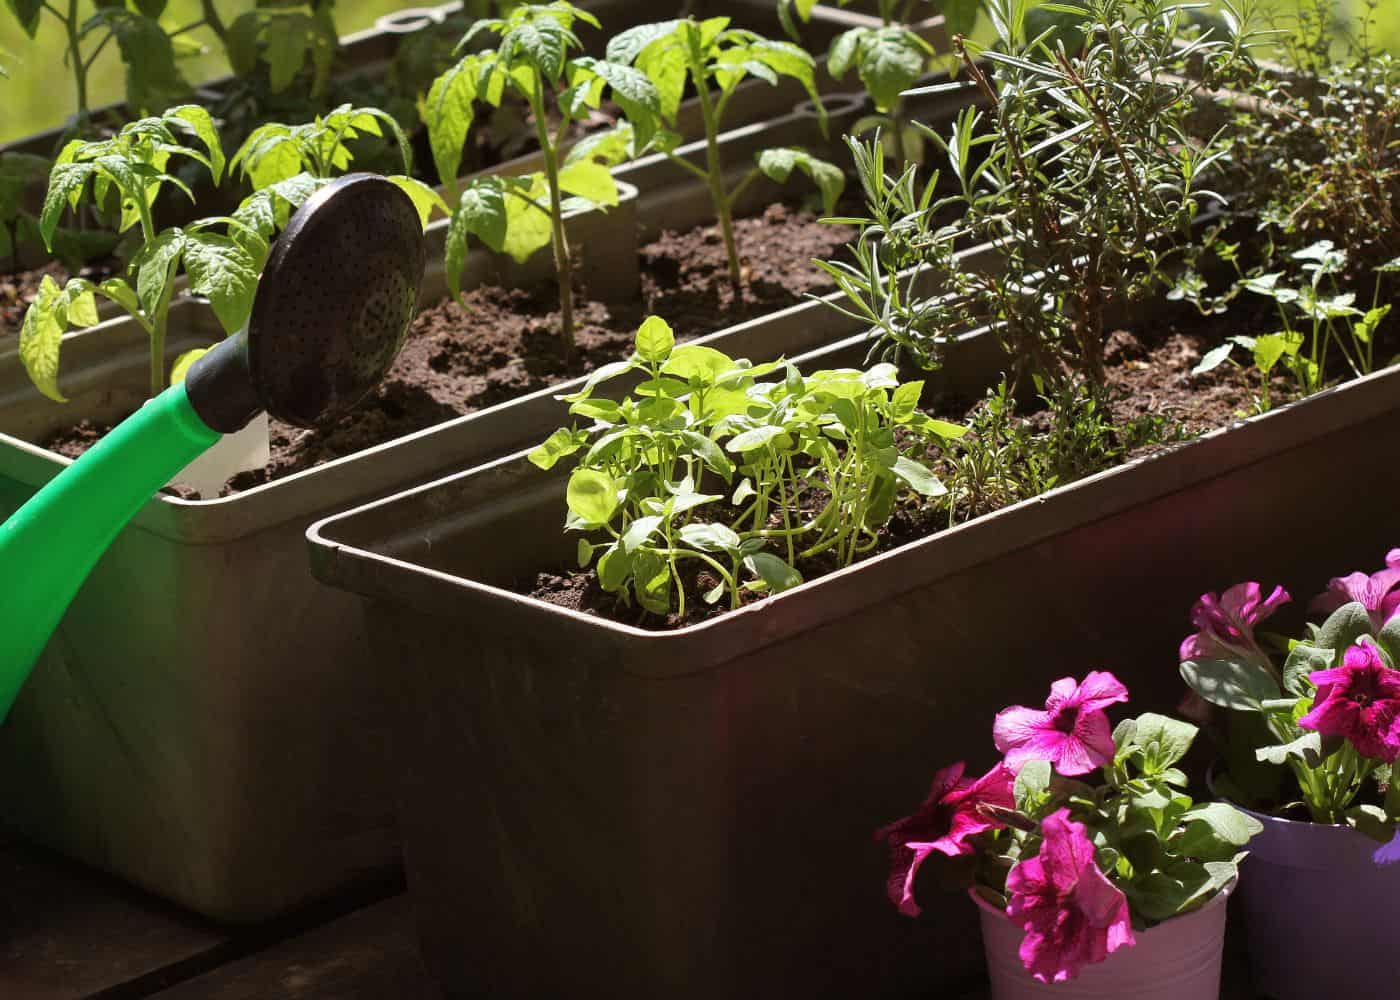 Tomatoes, herbs, and flowers growing in plastic planters